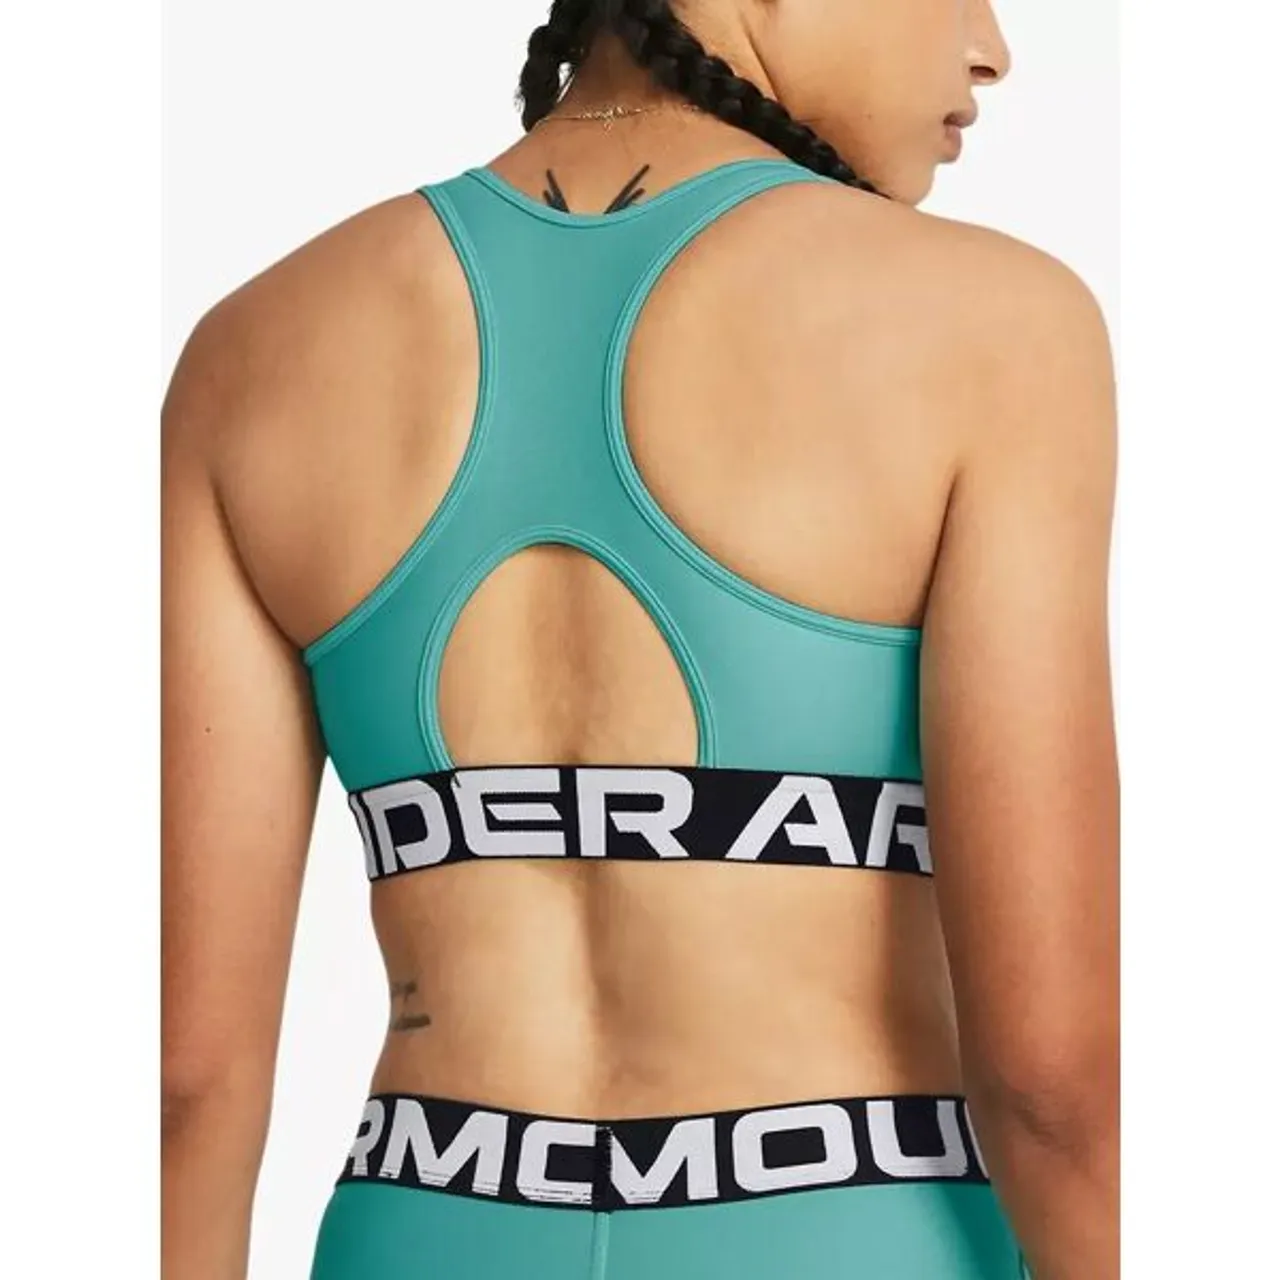 Under Armour HeatGearÂ® Armour Mid Branded Sports Bra, Turquoise/White - Turquoise/White - Female